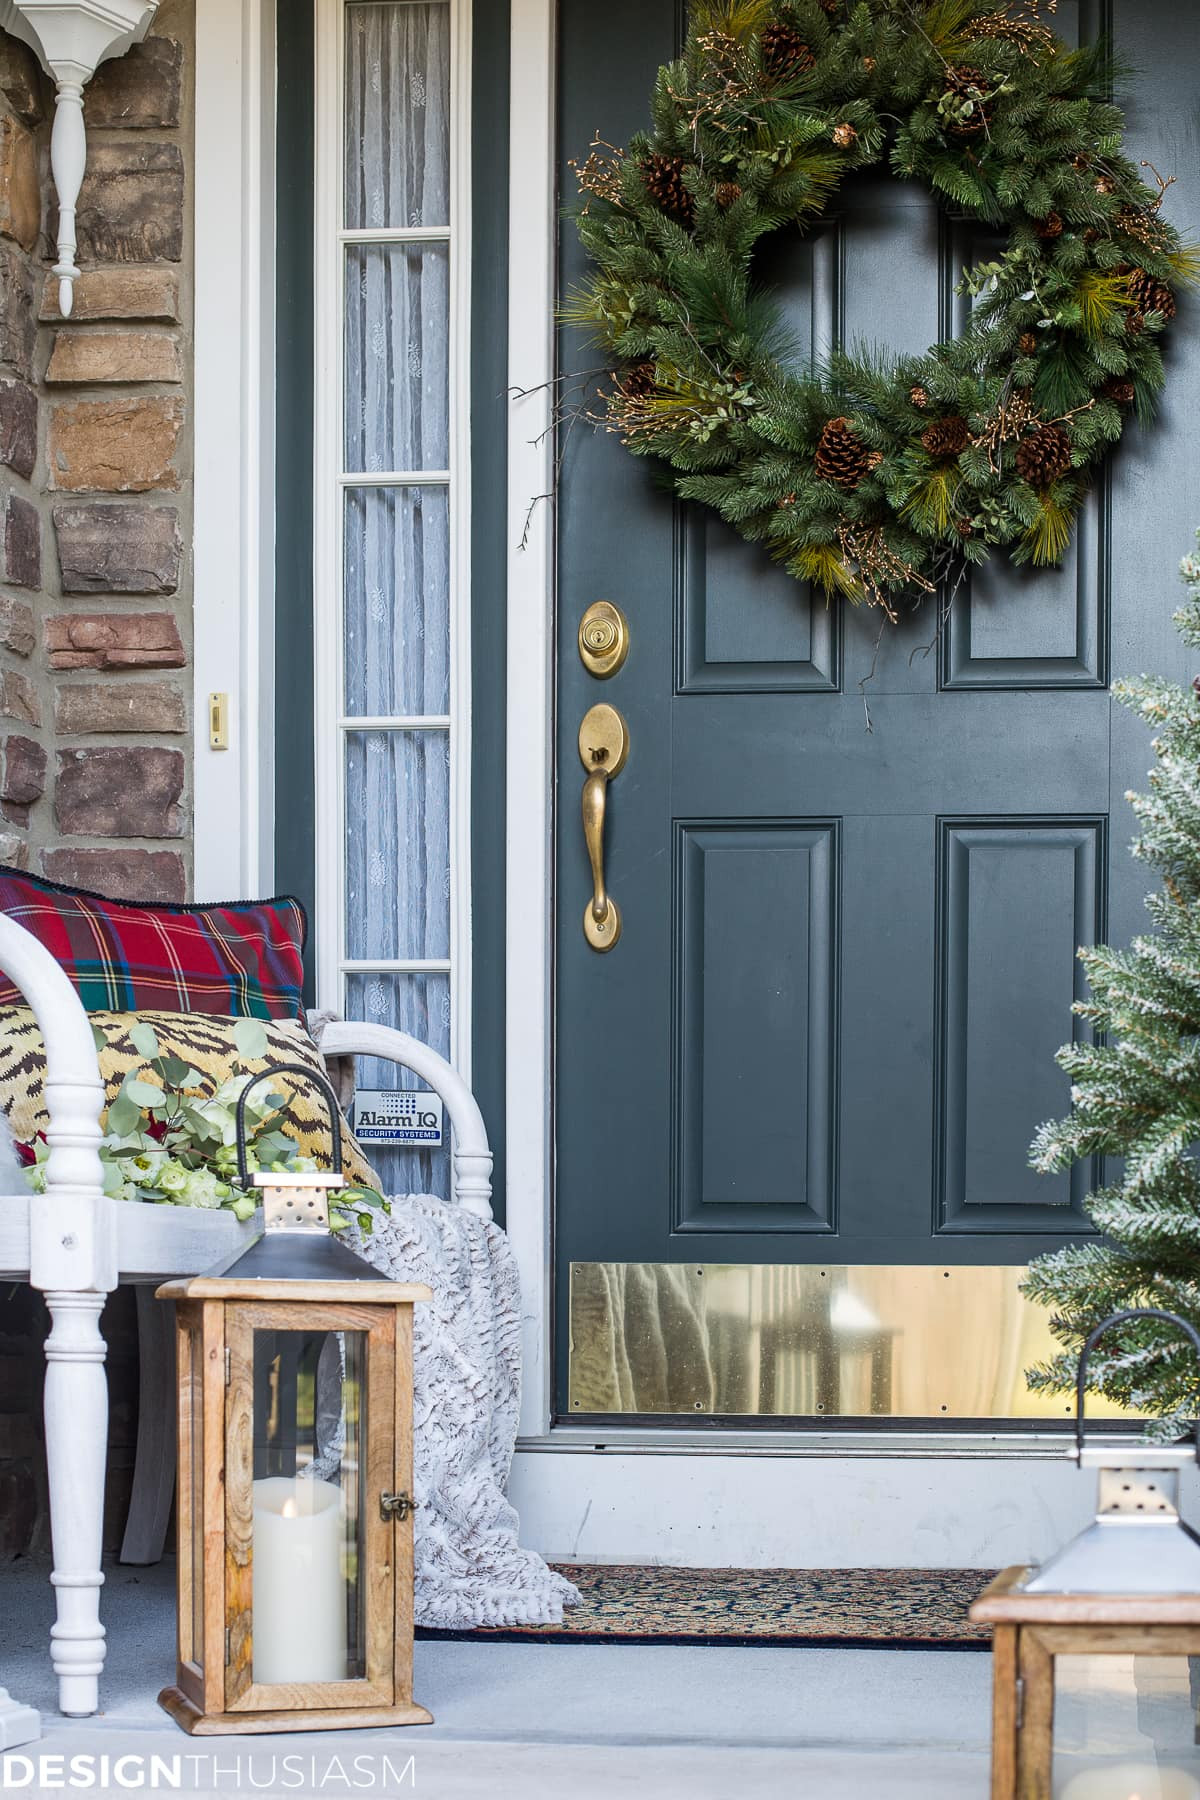 Easy Outdoor Christmas Decorating
 Easy Outdoor Christmas Decorating Ideas for a Tiny Front Porch